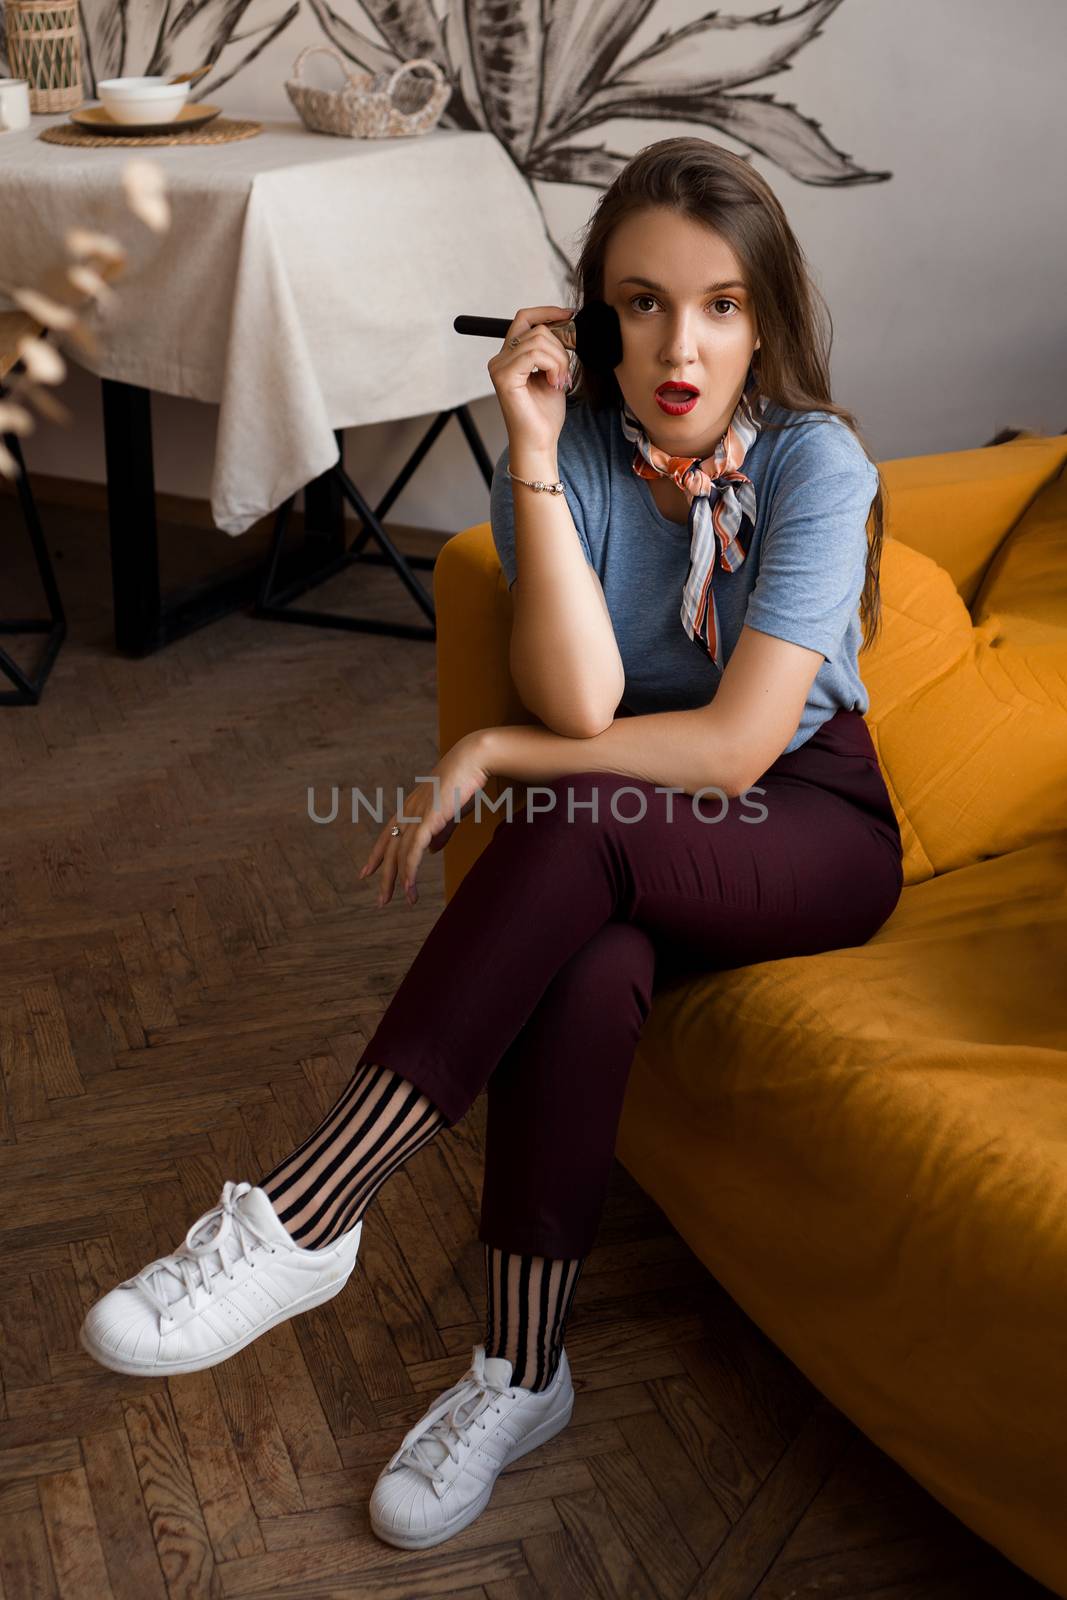 Make-up artist with brushes sitting on the couch in cozy interior